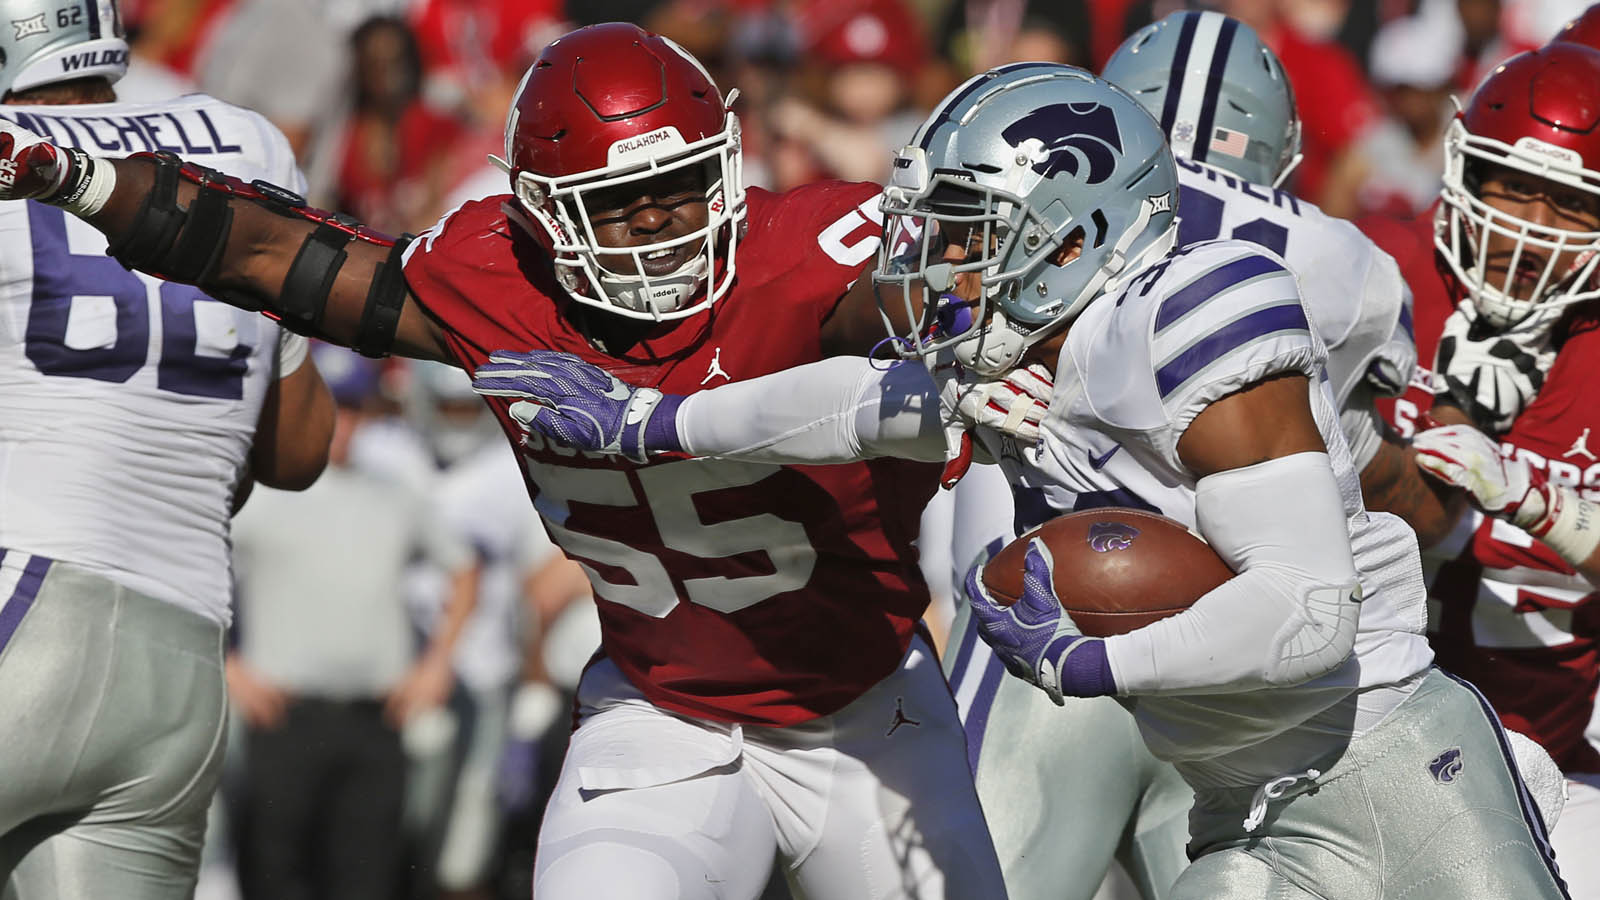 K-State suffers blowout loss, 51-14 to Oklahoma